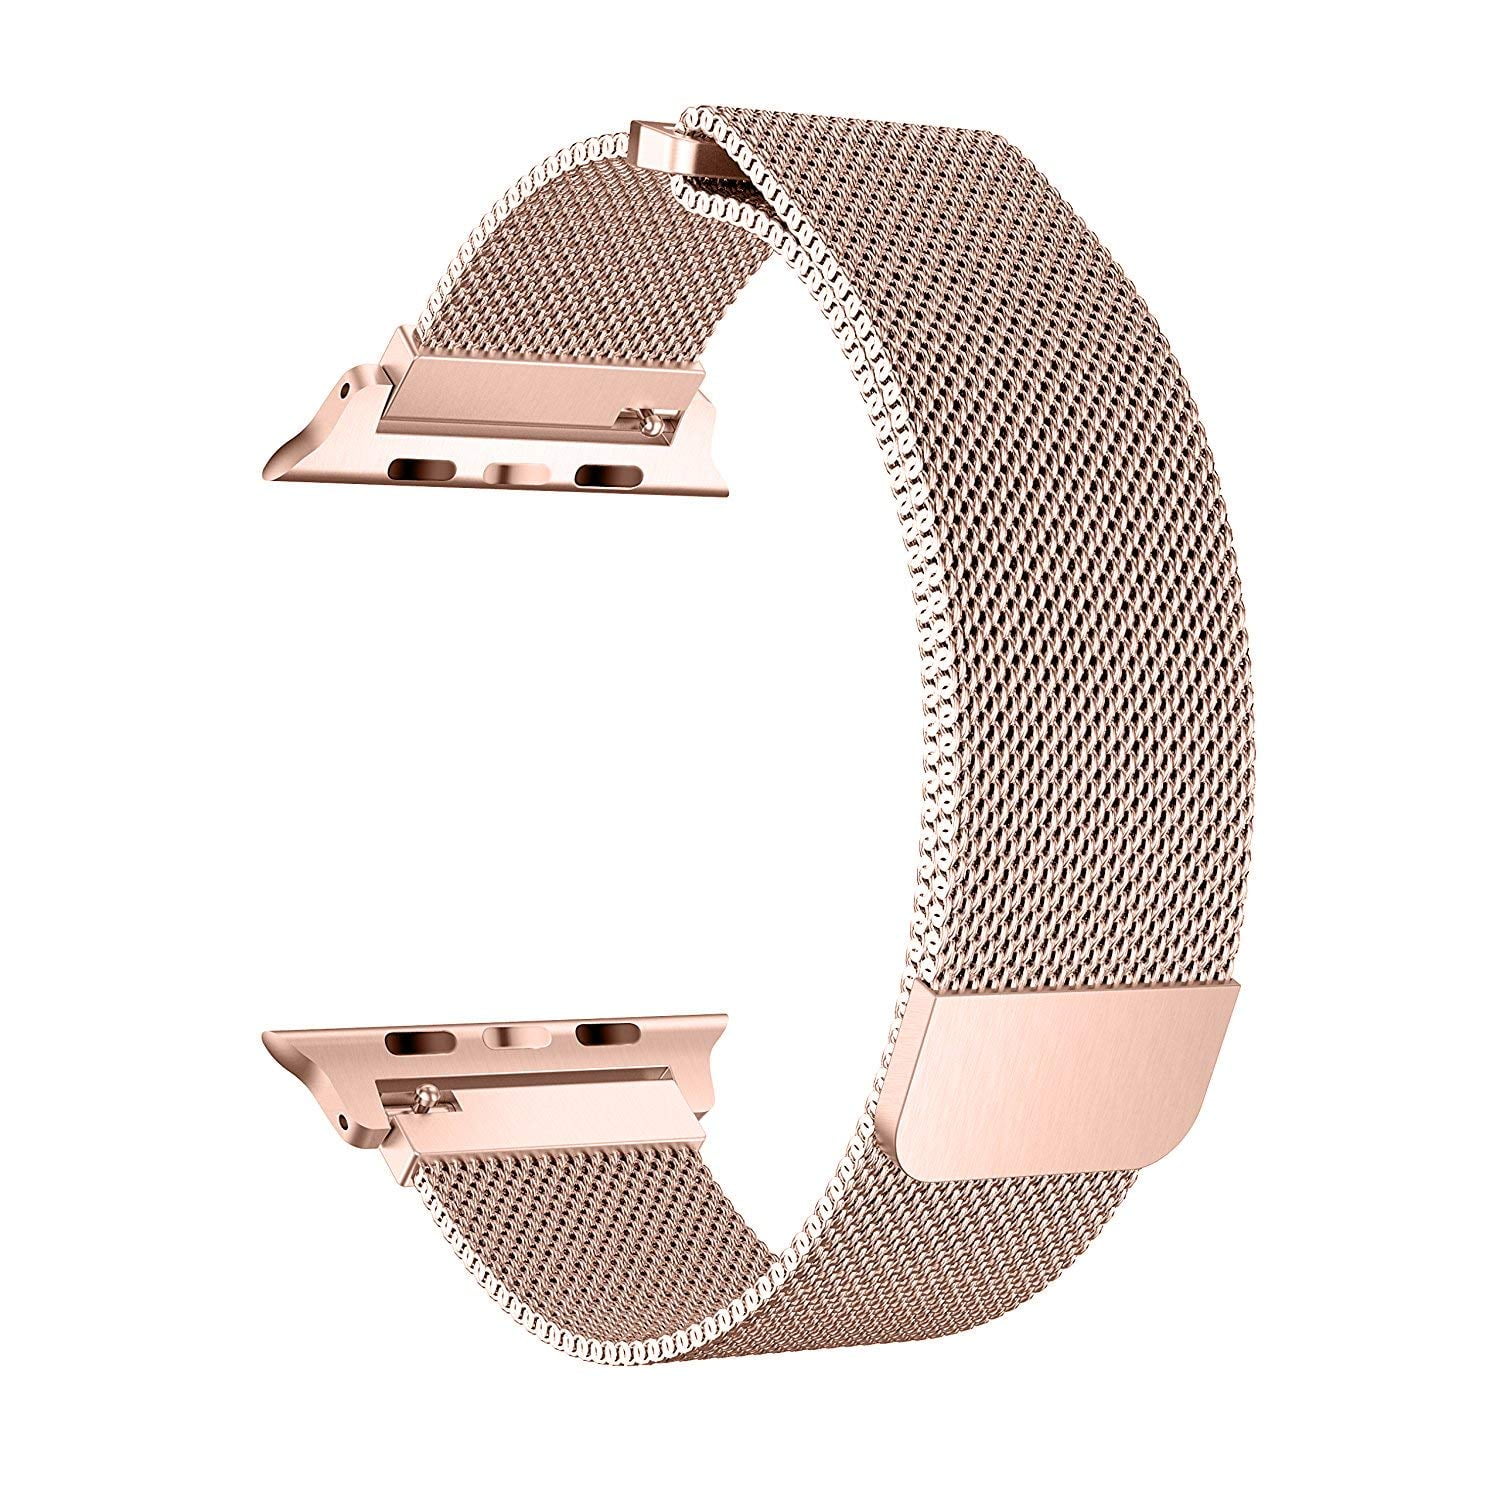 rose gold apple watch series 3 band